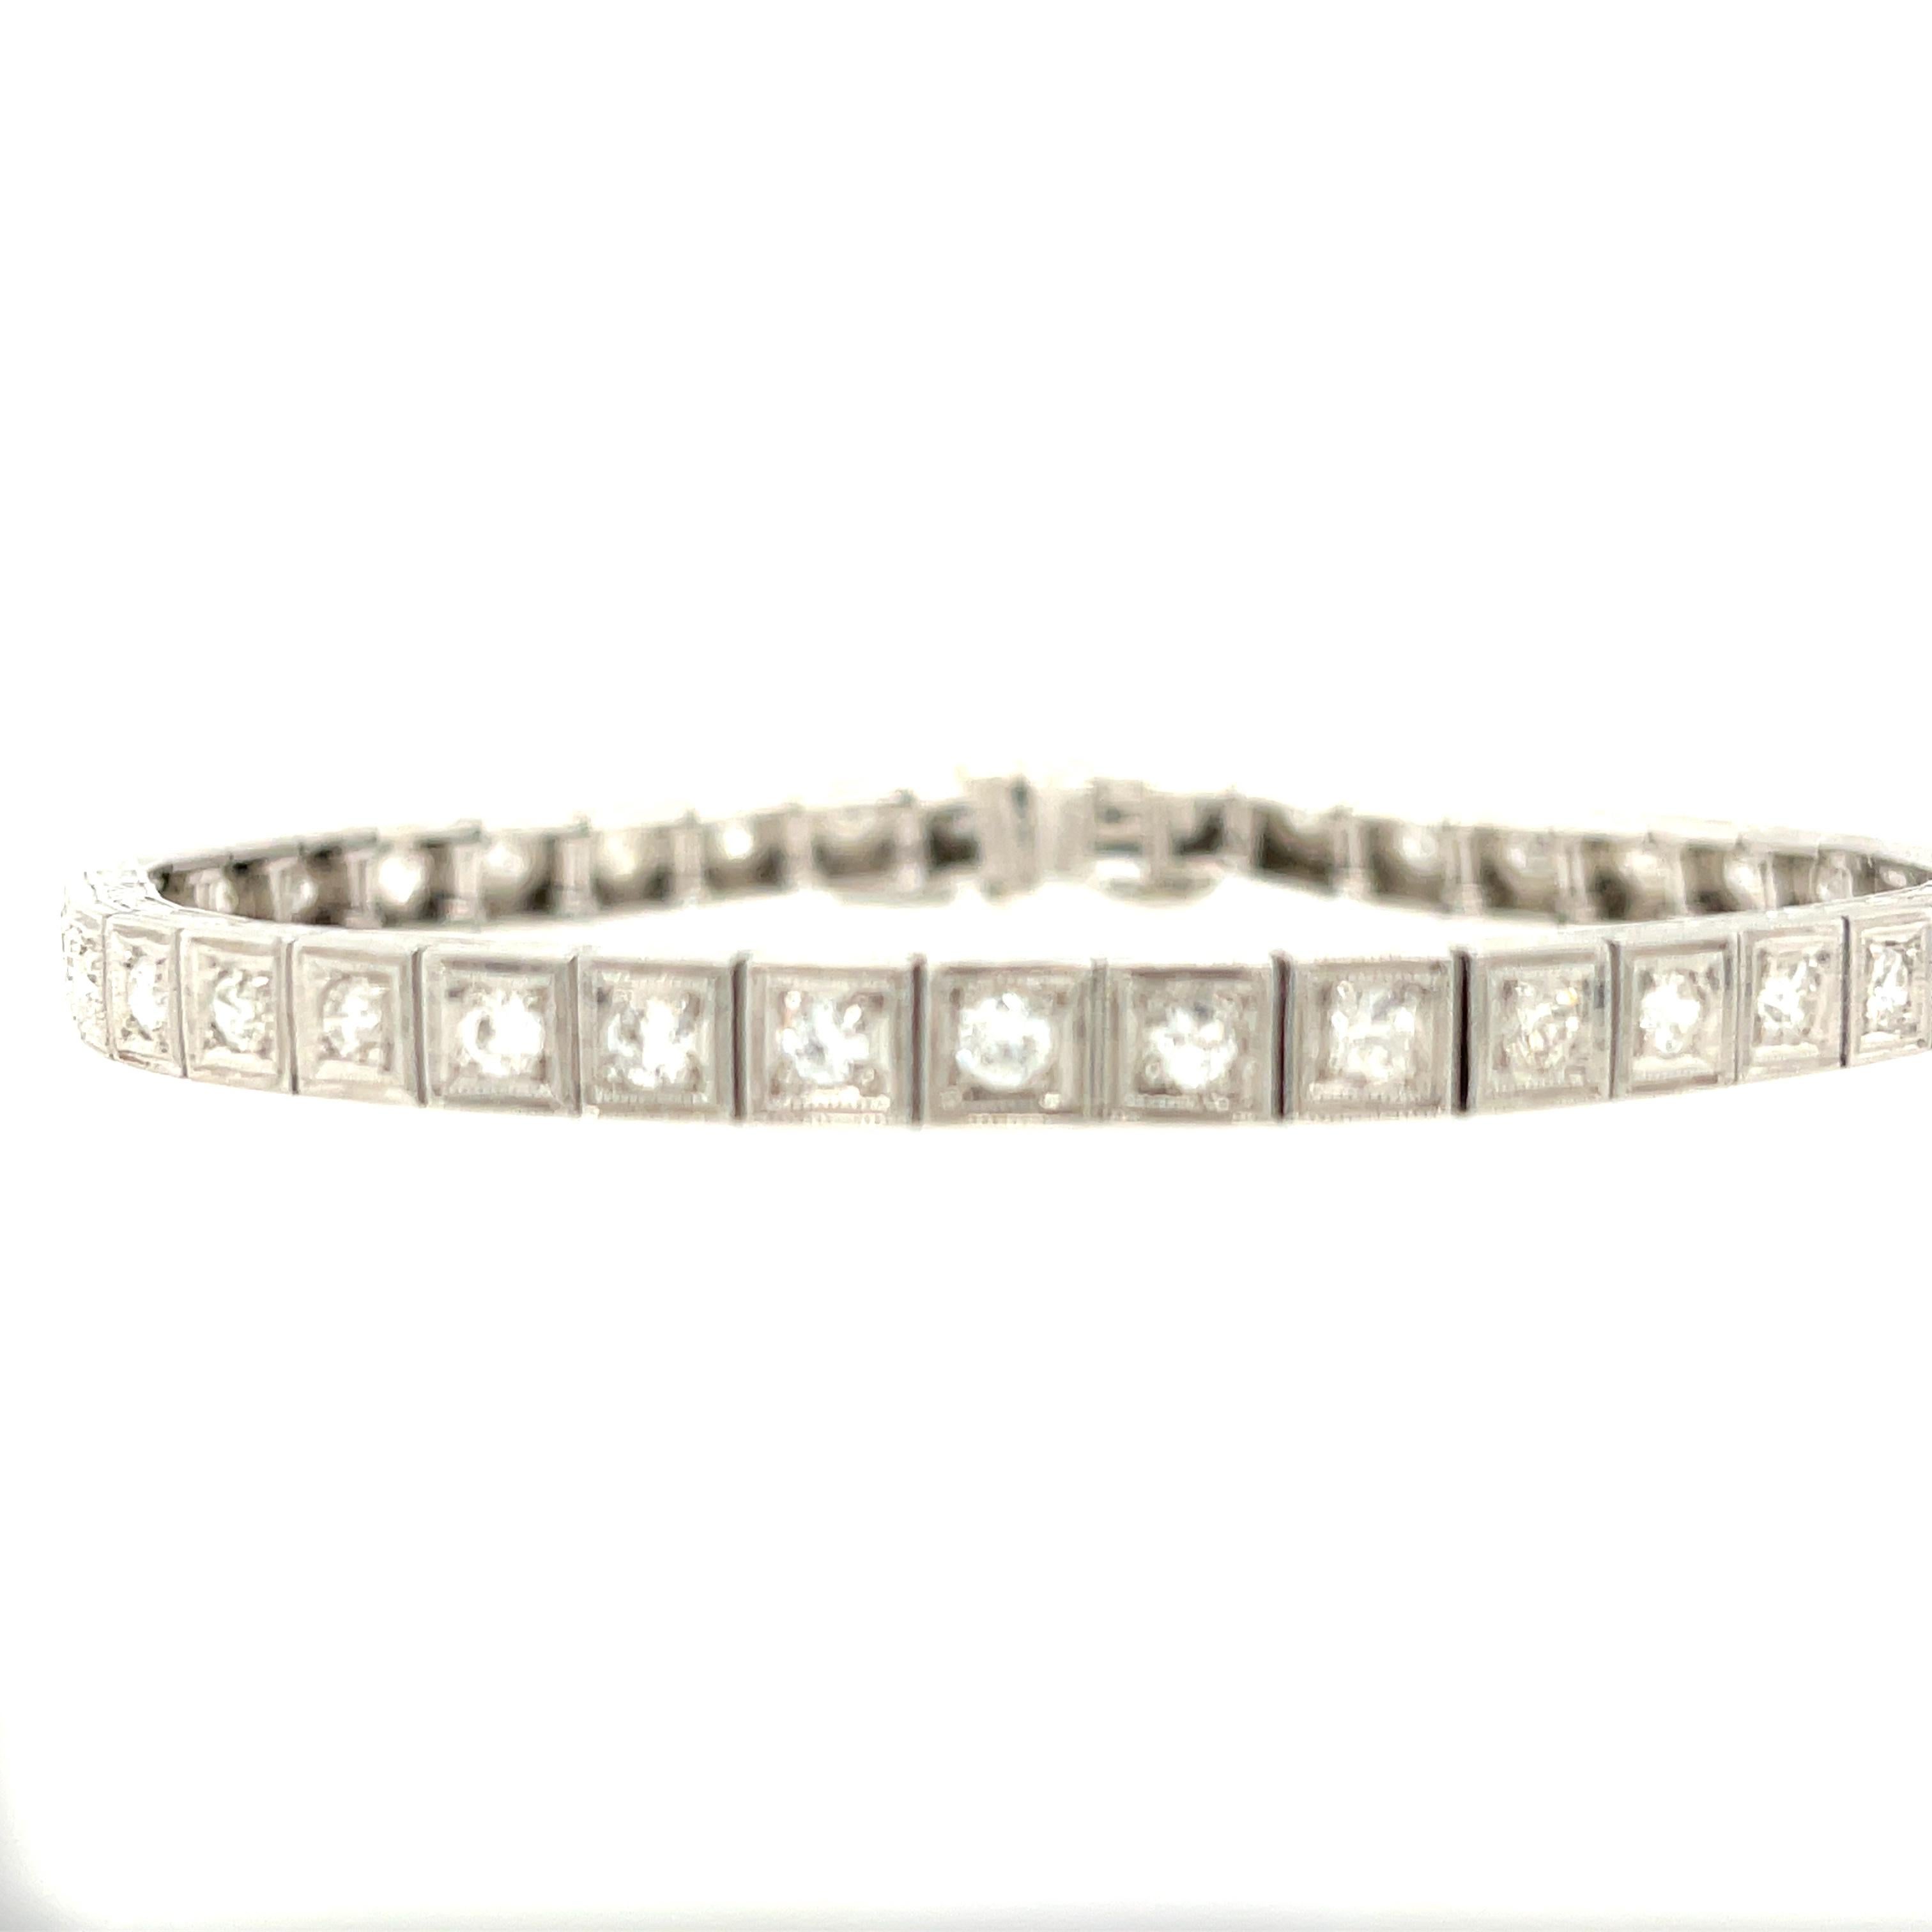 An antique Art Deco Diamond platinum line bracelet set with old European cut diamonds, circa 1920. The bracelet has 41 diamonds weighing approximately 2.50 carats total. The bracelet has beautiful engraved sides that is Indicative of the period.